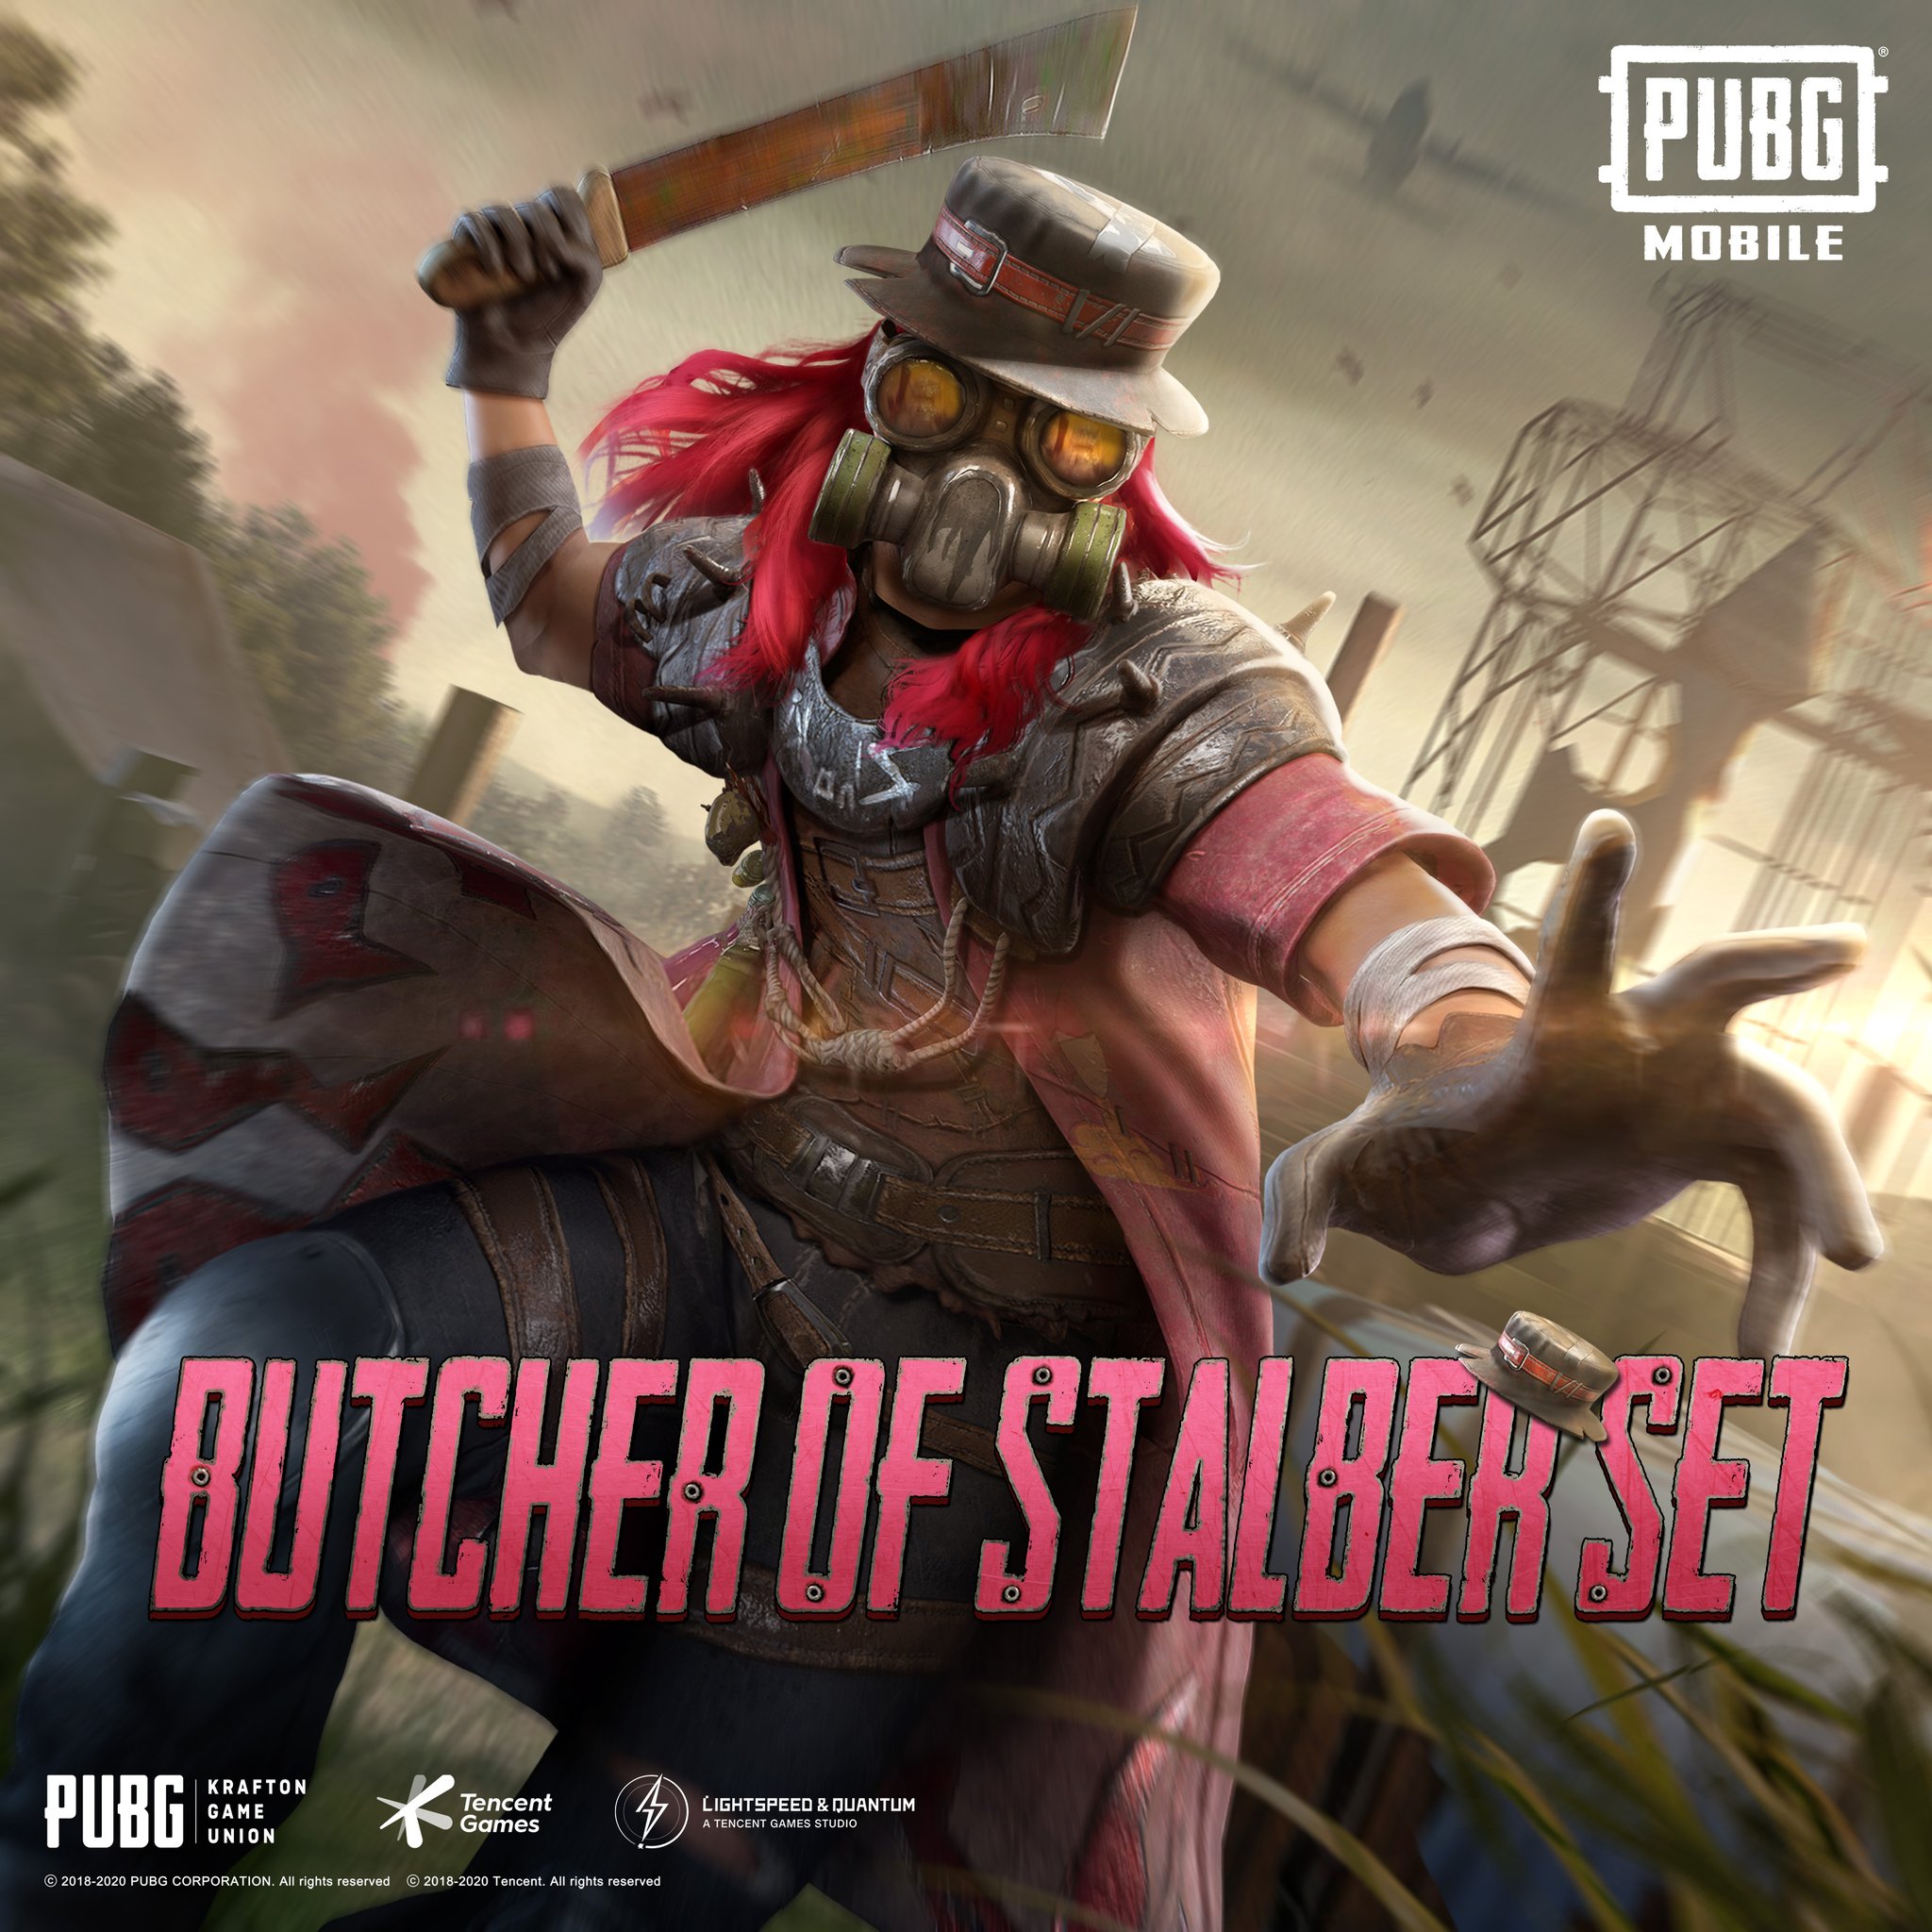 Butcher of Stalber PUBG Wallpapers